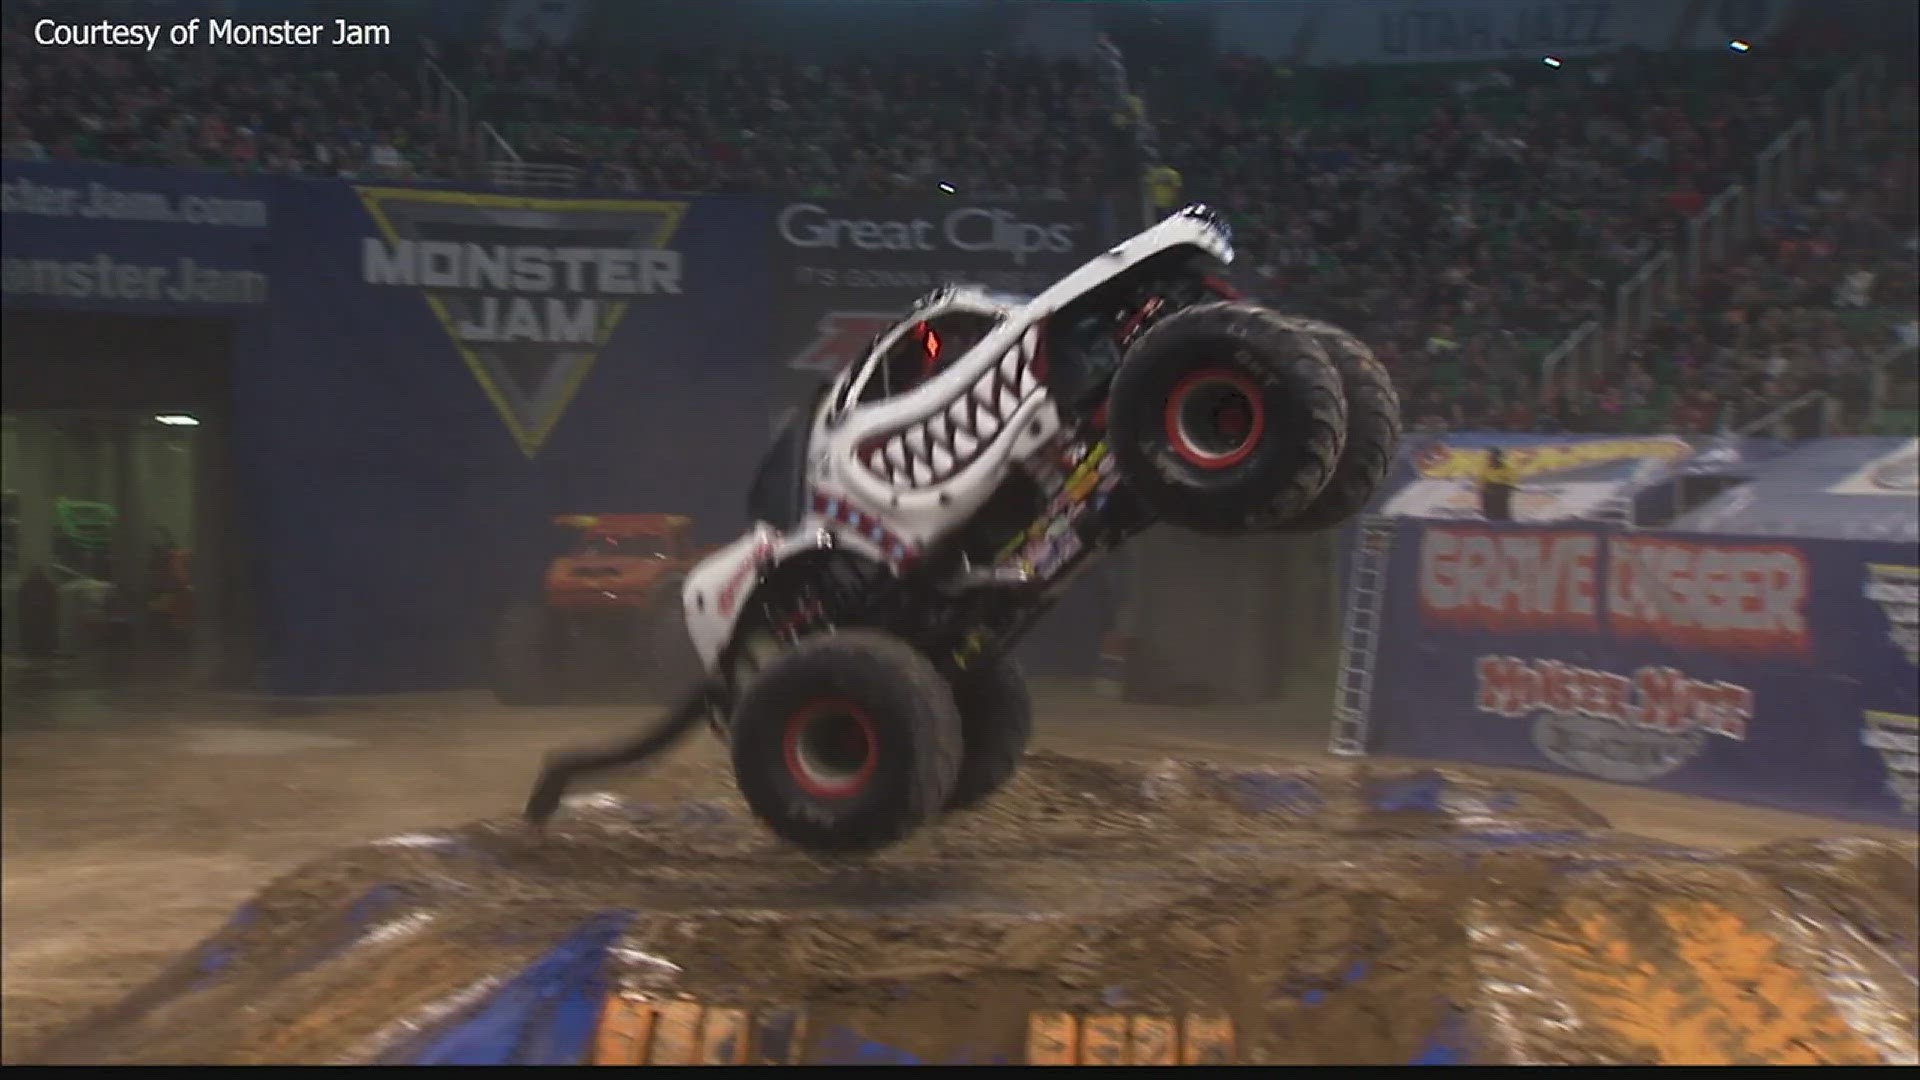 Big trucks doing big tricks - that's what the host of the Monster Jam motorsports show promises.